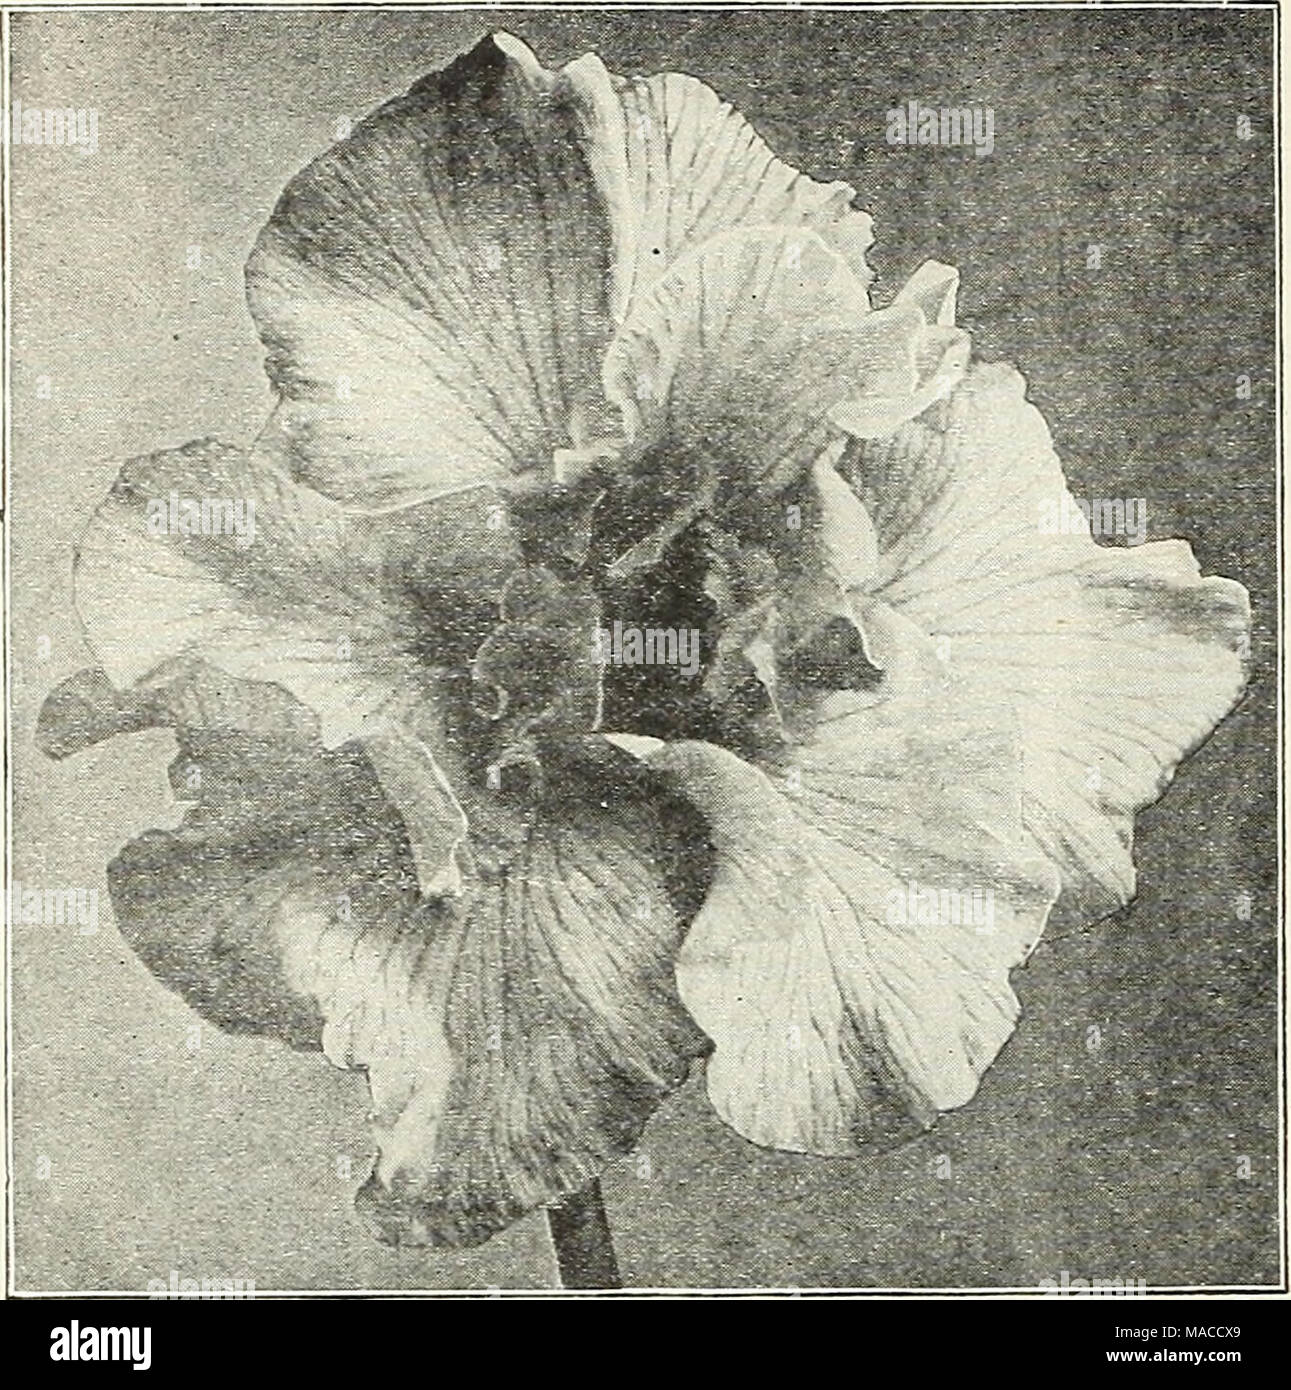 . Dreer's wholesale price list : flower seeds for florists plants for florists bulbs for florists vegetable seeds fertilizers, fungicides, insecticides, implements, etc . SIX-PETALED JAPANESE IRIS Dreer's Imperial Japanese Iris No. Order by name or number. 3. kosui-no-lro. Violet-blue, veined with white; 6 petals. 4. Vomo-no-uml. A fine, free-flowering early creamy-white, 6 petals. 15. Gekka=no-naml. Very early pure white. 16. kummoma-no-sora. Silvery white, suffused with soft light blue. 44. Yoshlmo. Creamy-white, delicately veined with violet. 65. Shuchlukwa. Crimson-purple with large white  Stock Photo